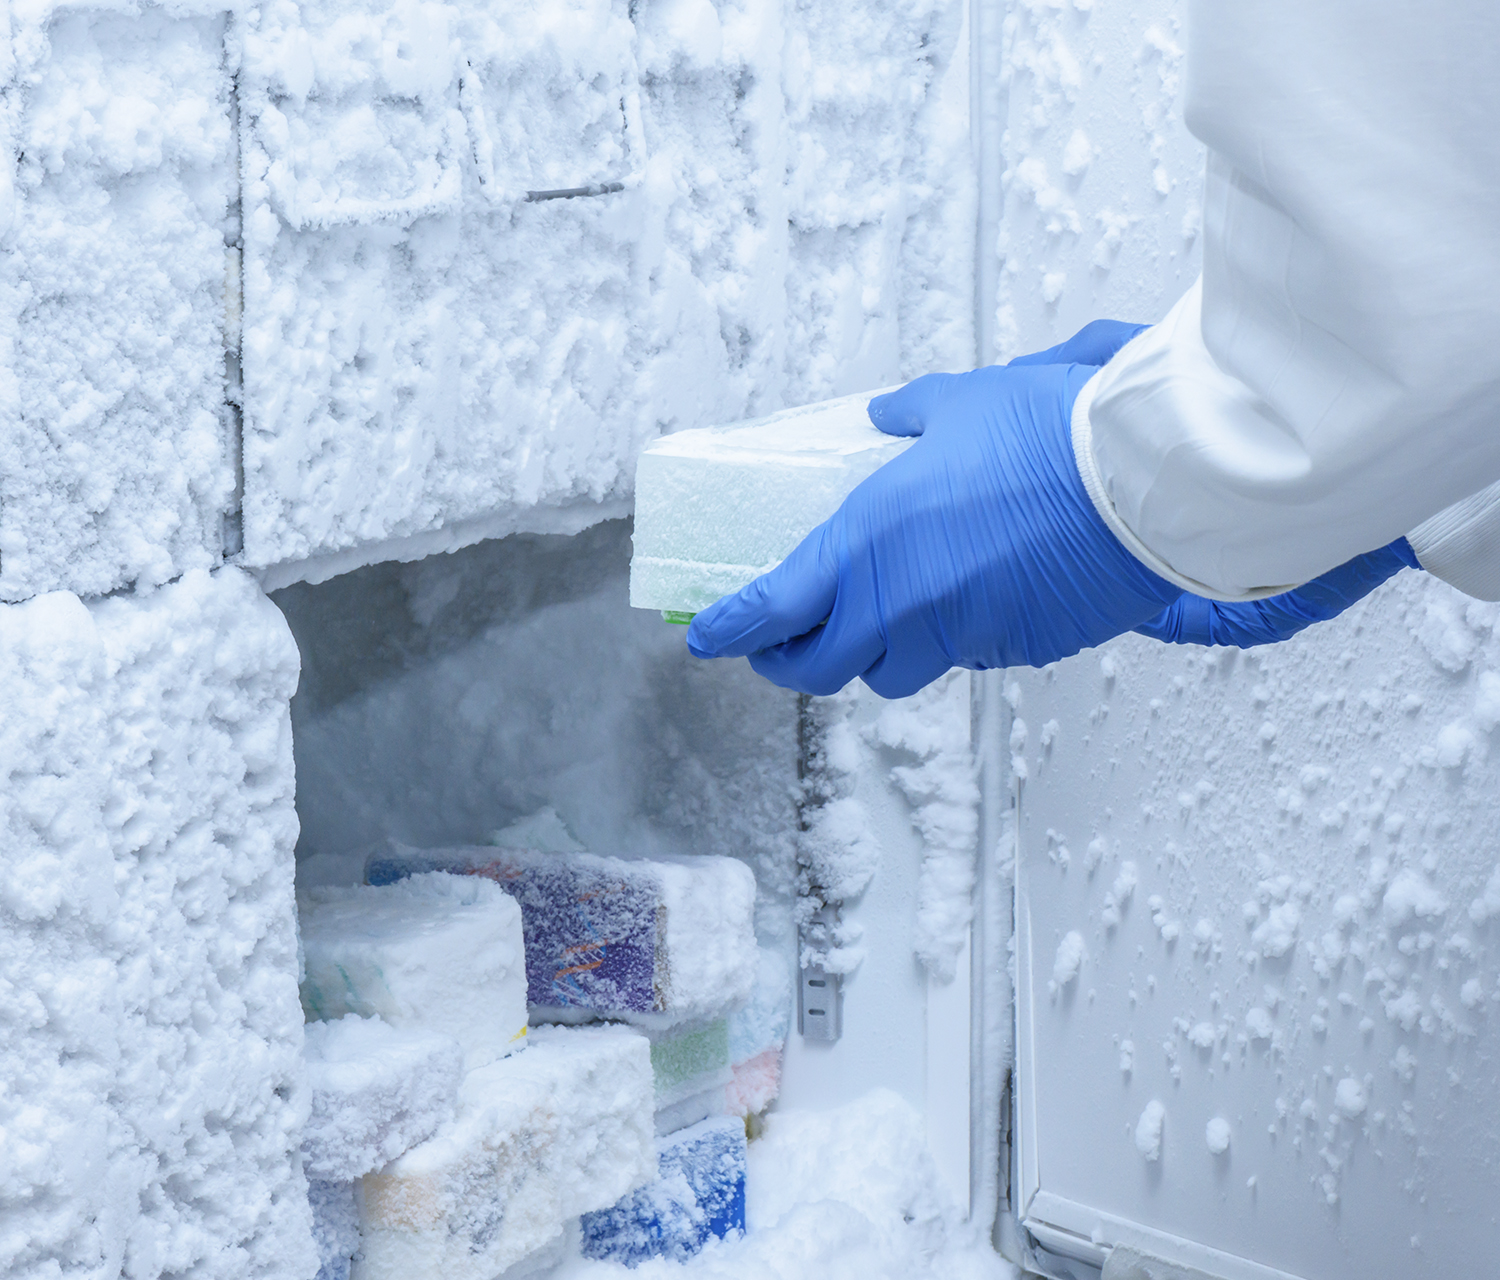 Cell specimens being placed in an ultra-low temperature freezer